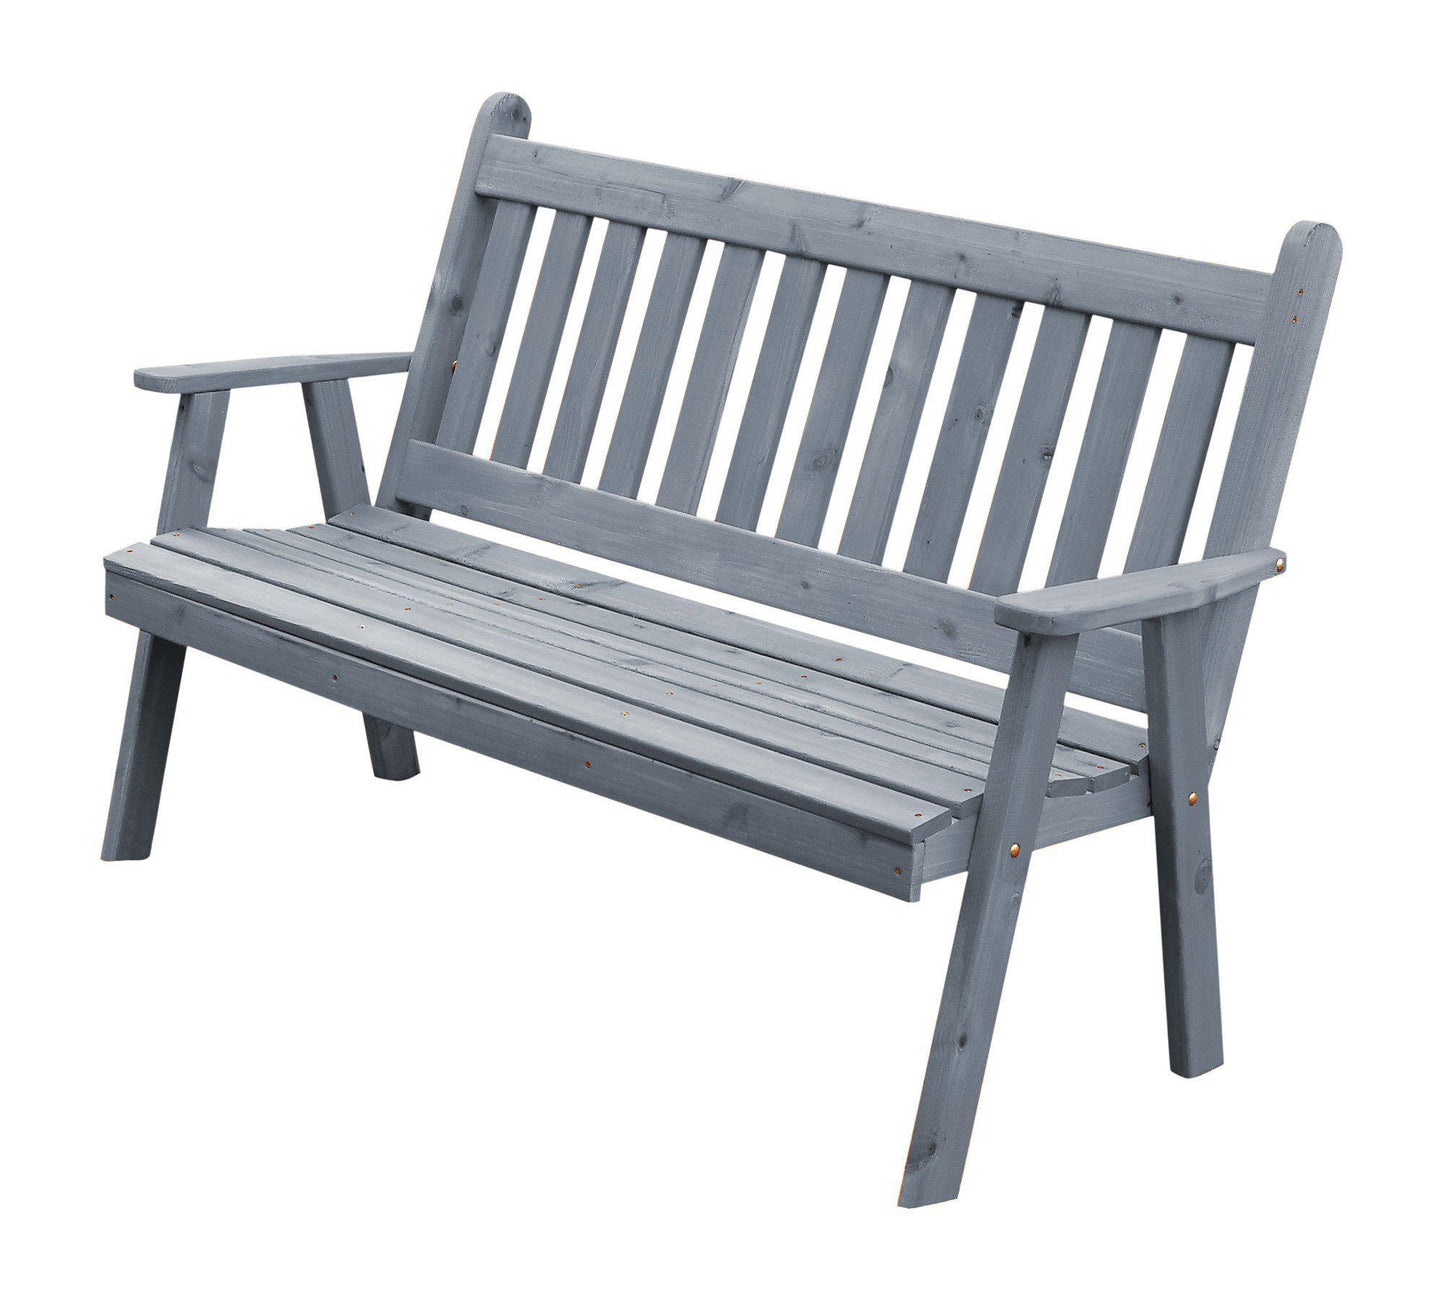 A&L Furniture Co. Western Red Cedar 6' Traditional English Garden Bench - LEAD TIME TO SHIP 4 WEEKS OR LESS